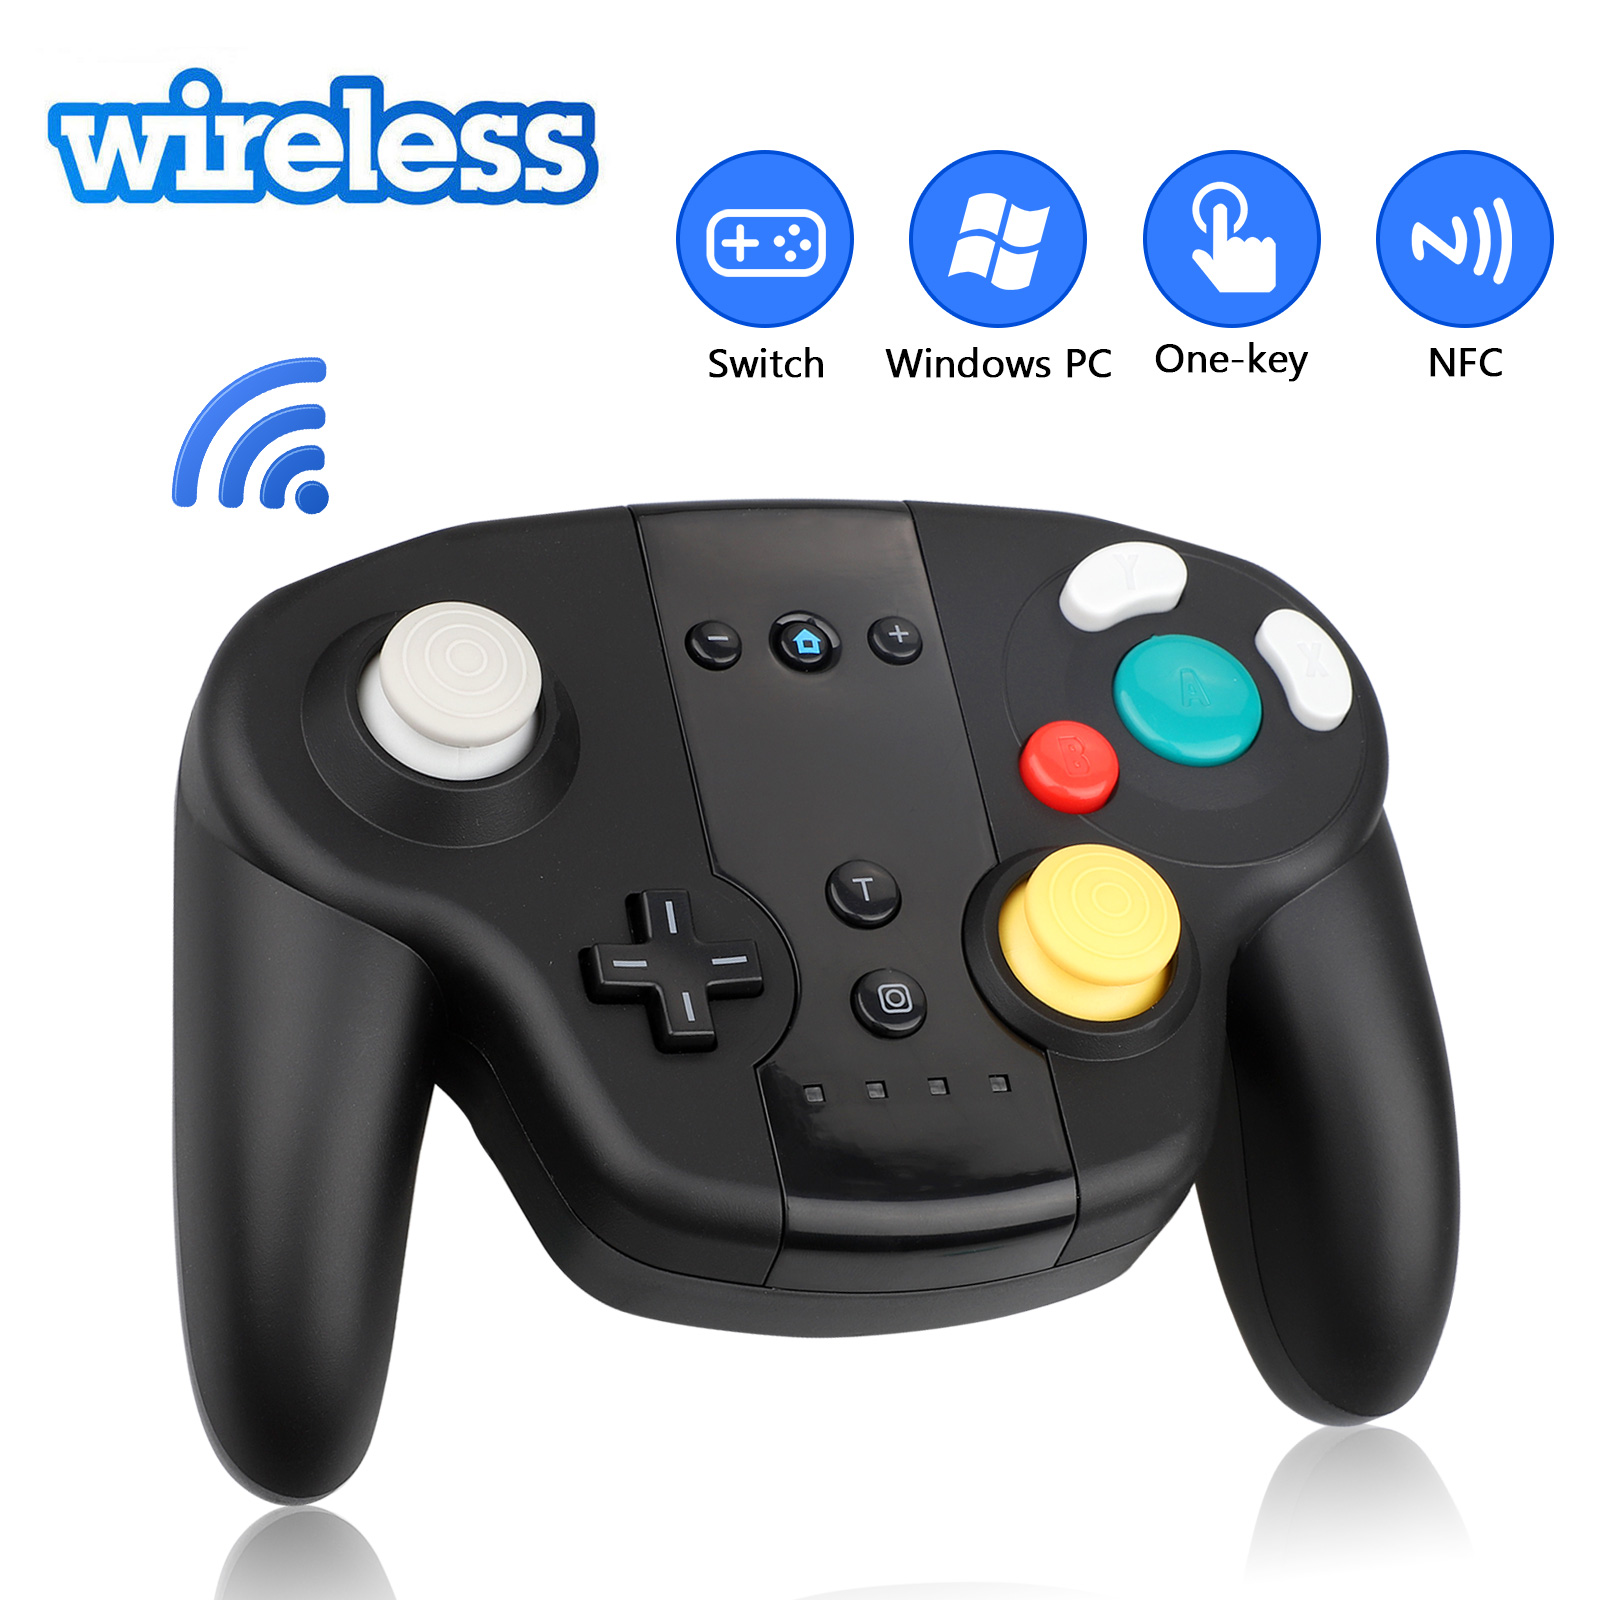 Eeekit Wireless Gamecube Controller Switch Compatible With - free custom signal lights gc roblox